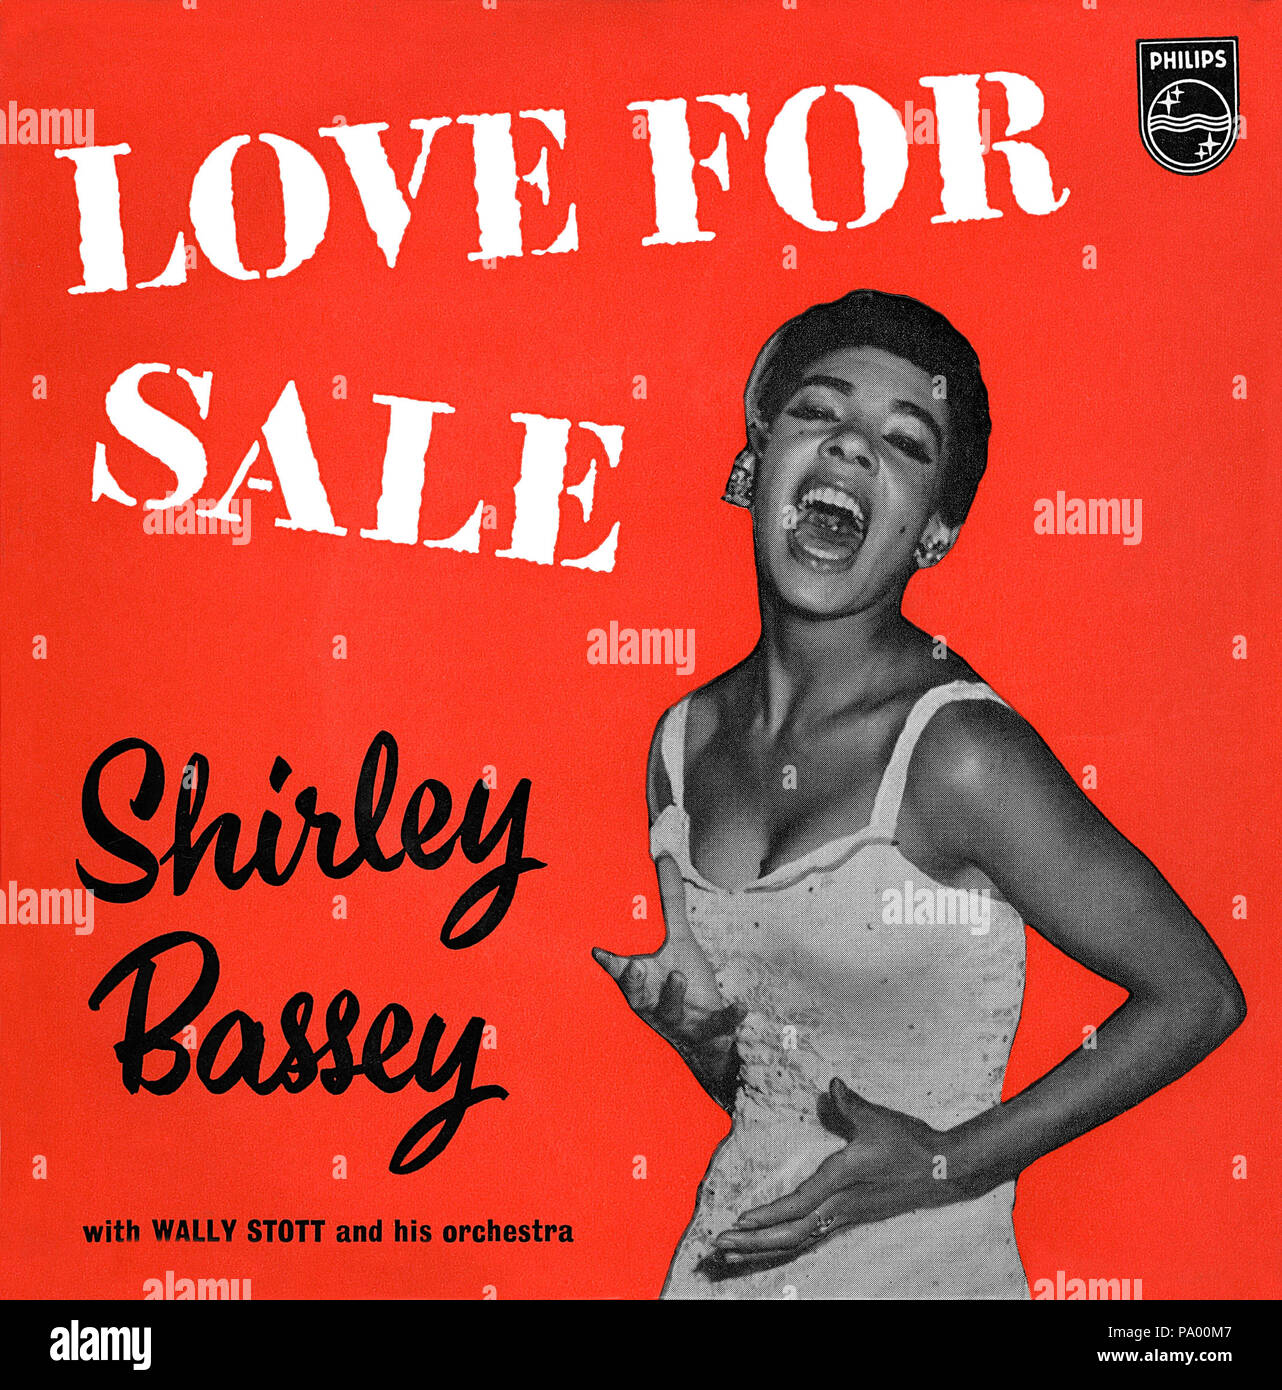 UK 45 rpm 7' EP by Shirley Bassey titled Love For Sale on the Philips label from 1960. Includes the songs Crazy Rhythm, Night And Day, The Gypsy In My Soul and Love For Sale. Arranged by Wally Stott (who later became Angela Morley) and produced by Johnny Franz. Stock Photo